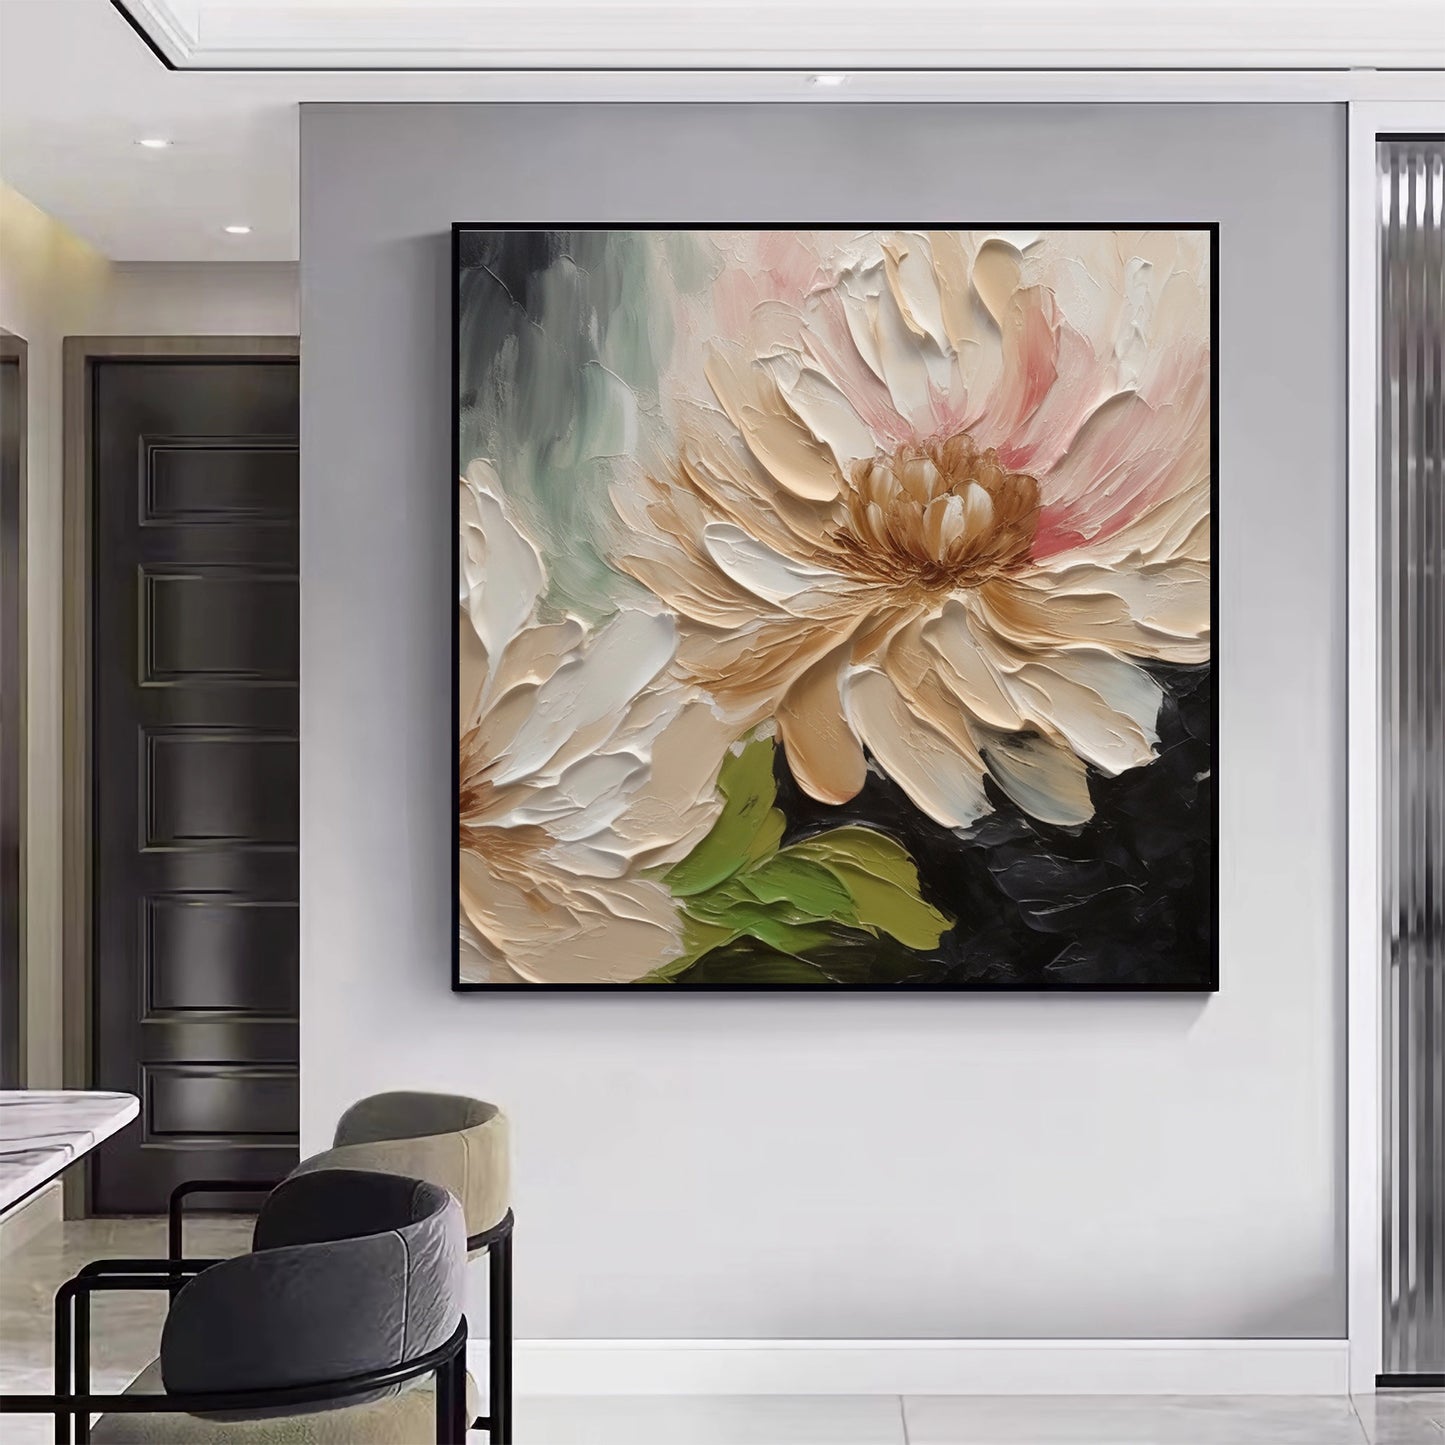 Large Flower Oil Painting on Canvas, Original Abstract Floral Painting F0416ART2316